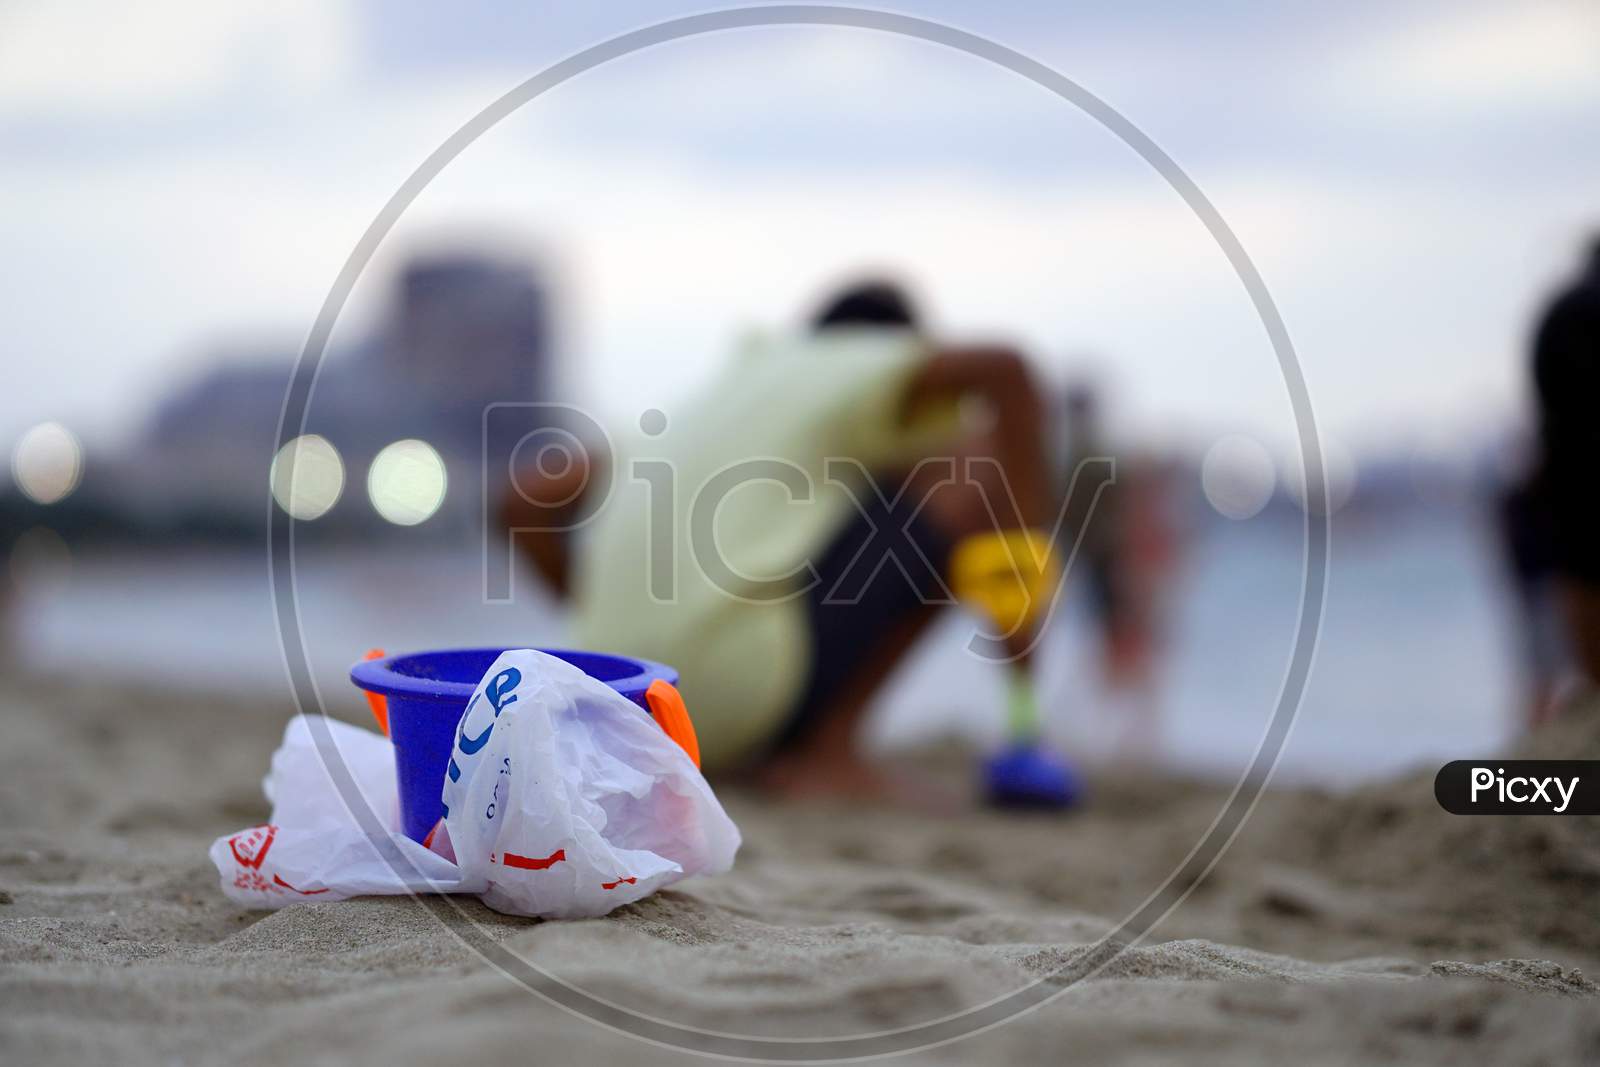 Plastic toys and covers used by kid at a beach